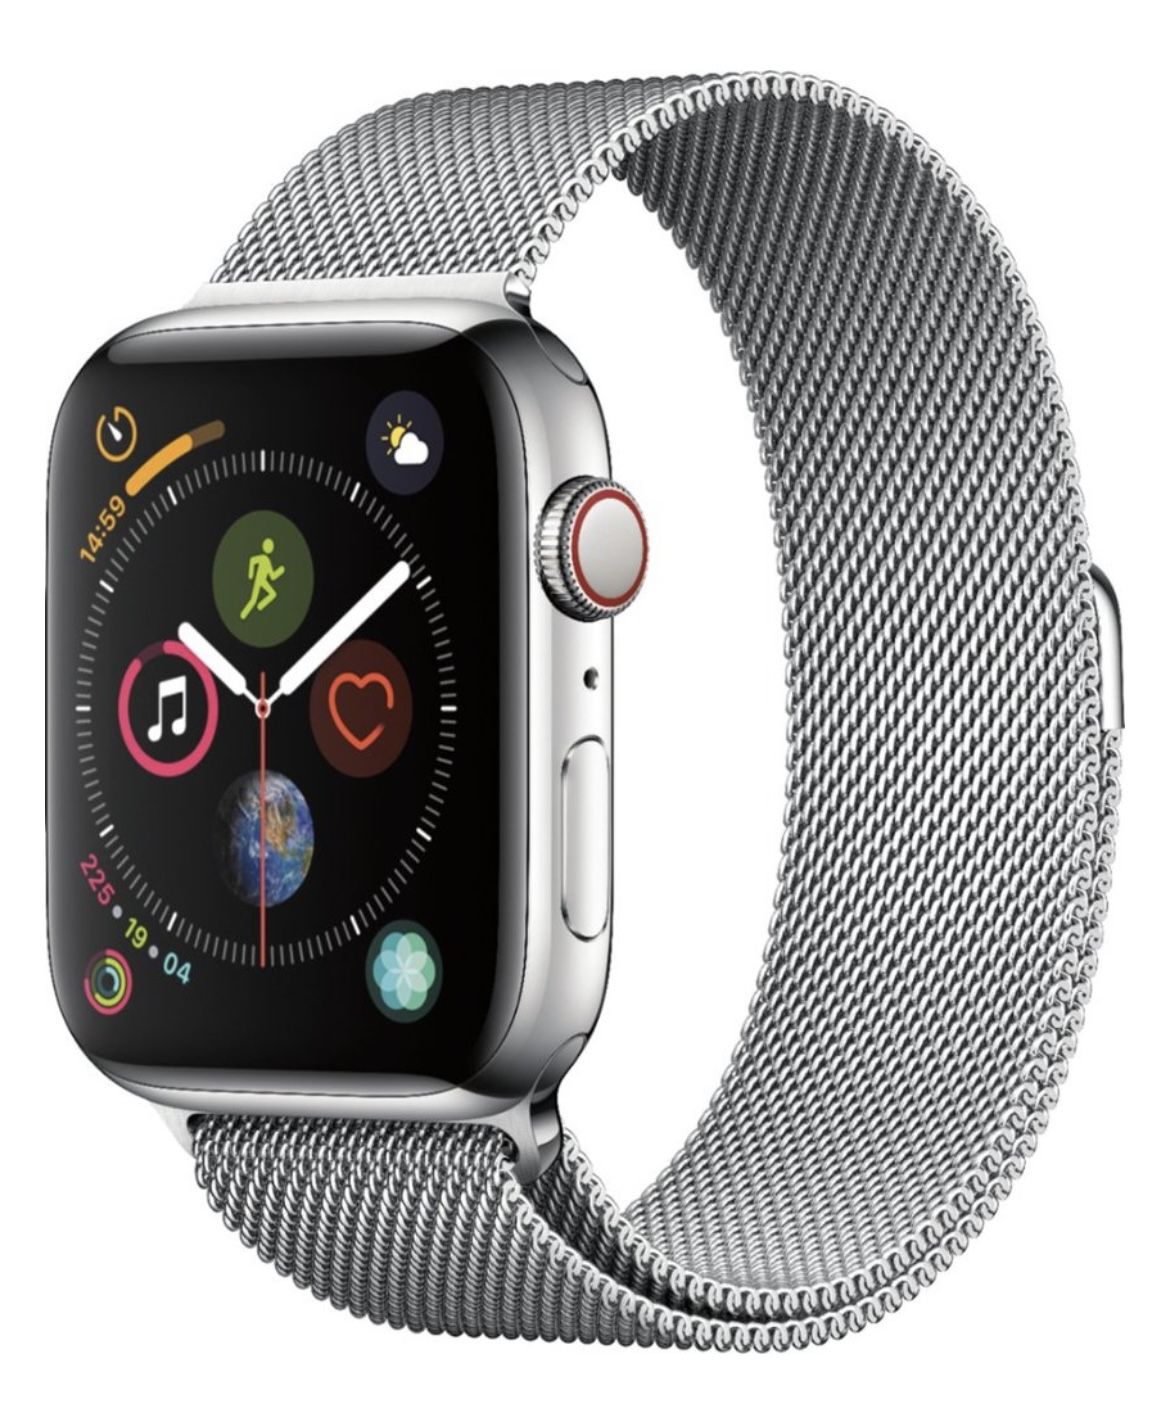 Apple Watch Series 4 (GPS + Cellular) 44mm Stainless Steel Case with Milanese Loop